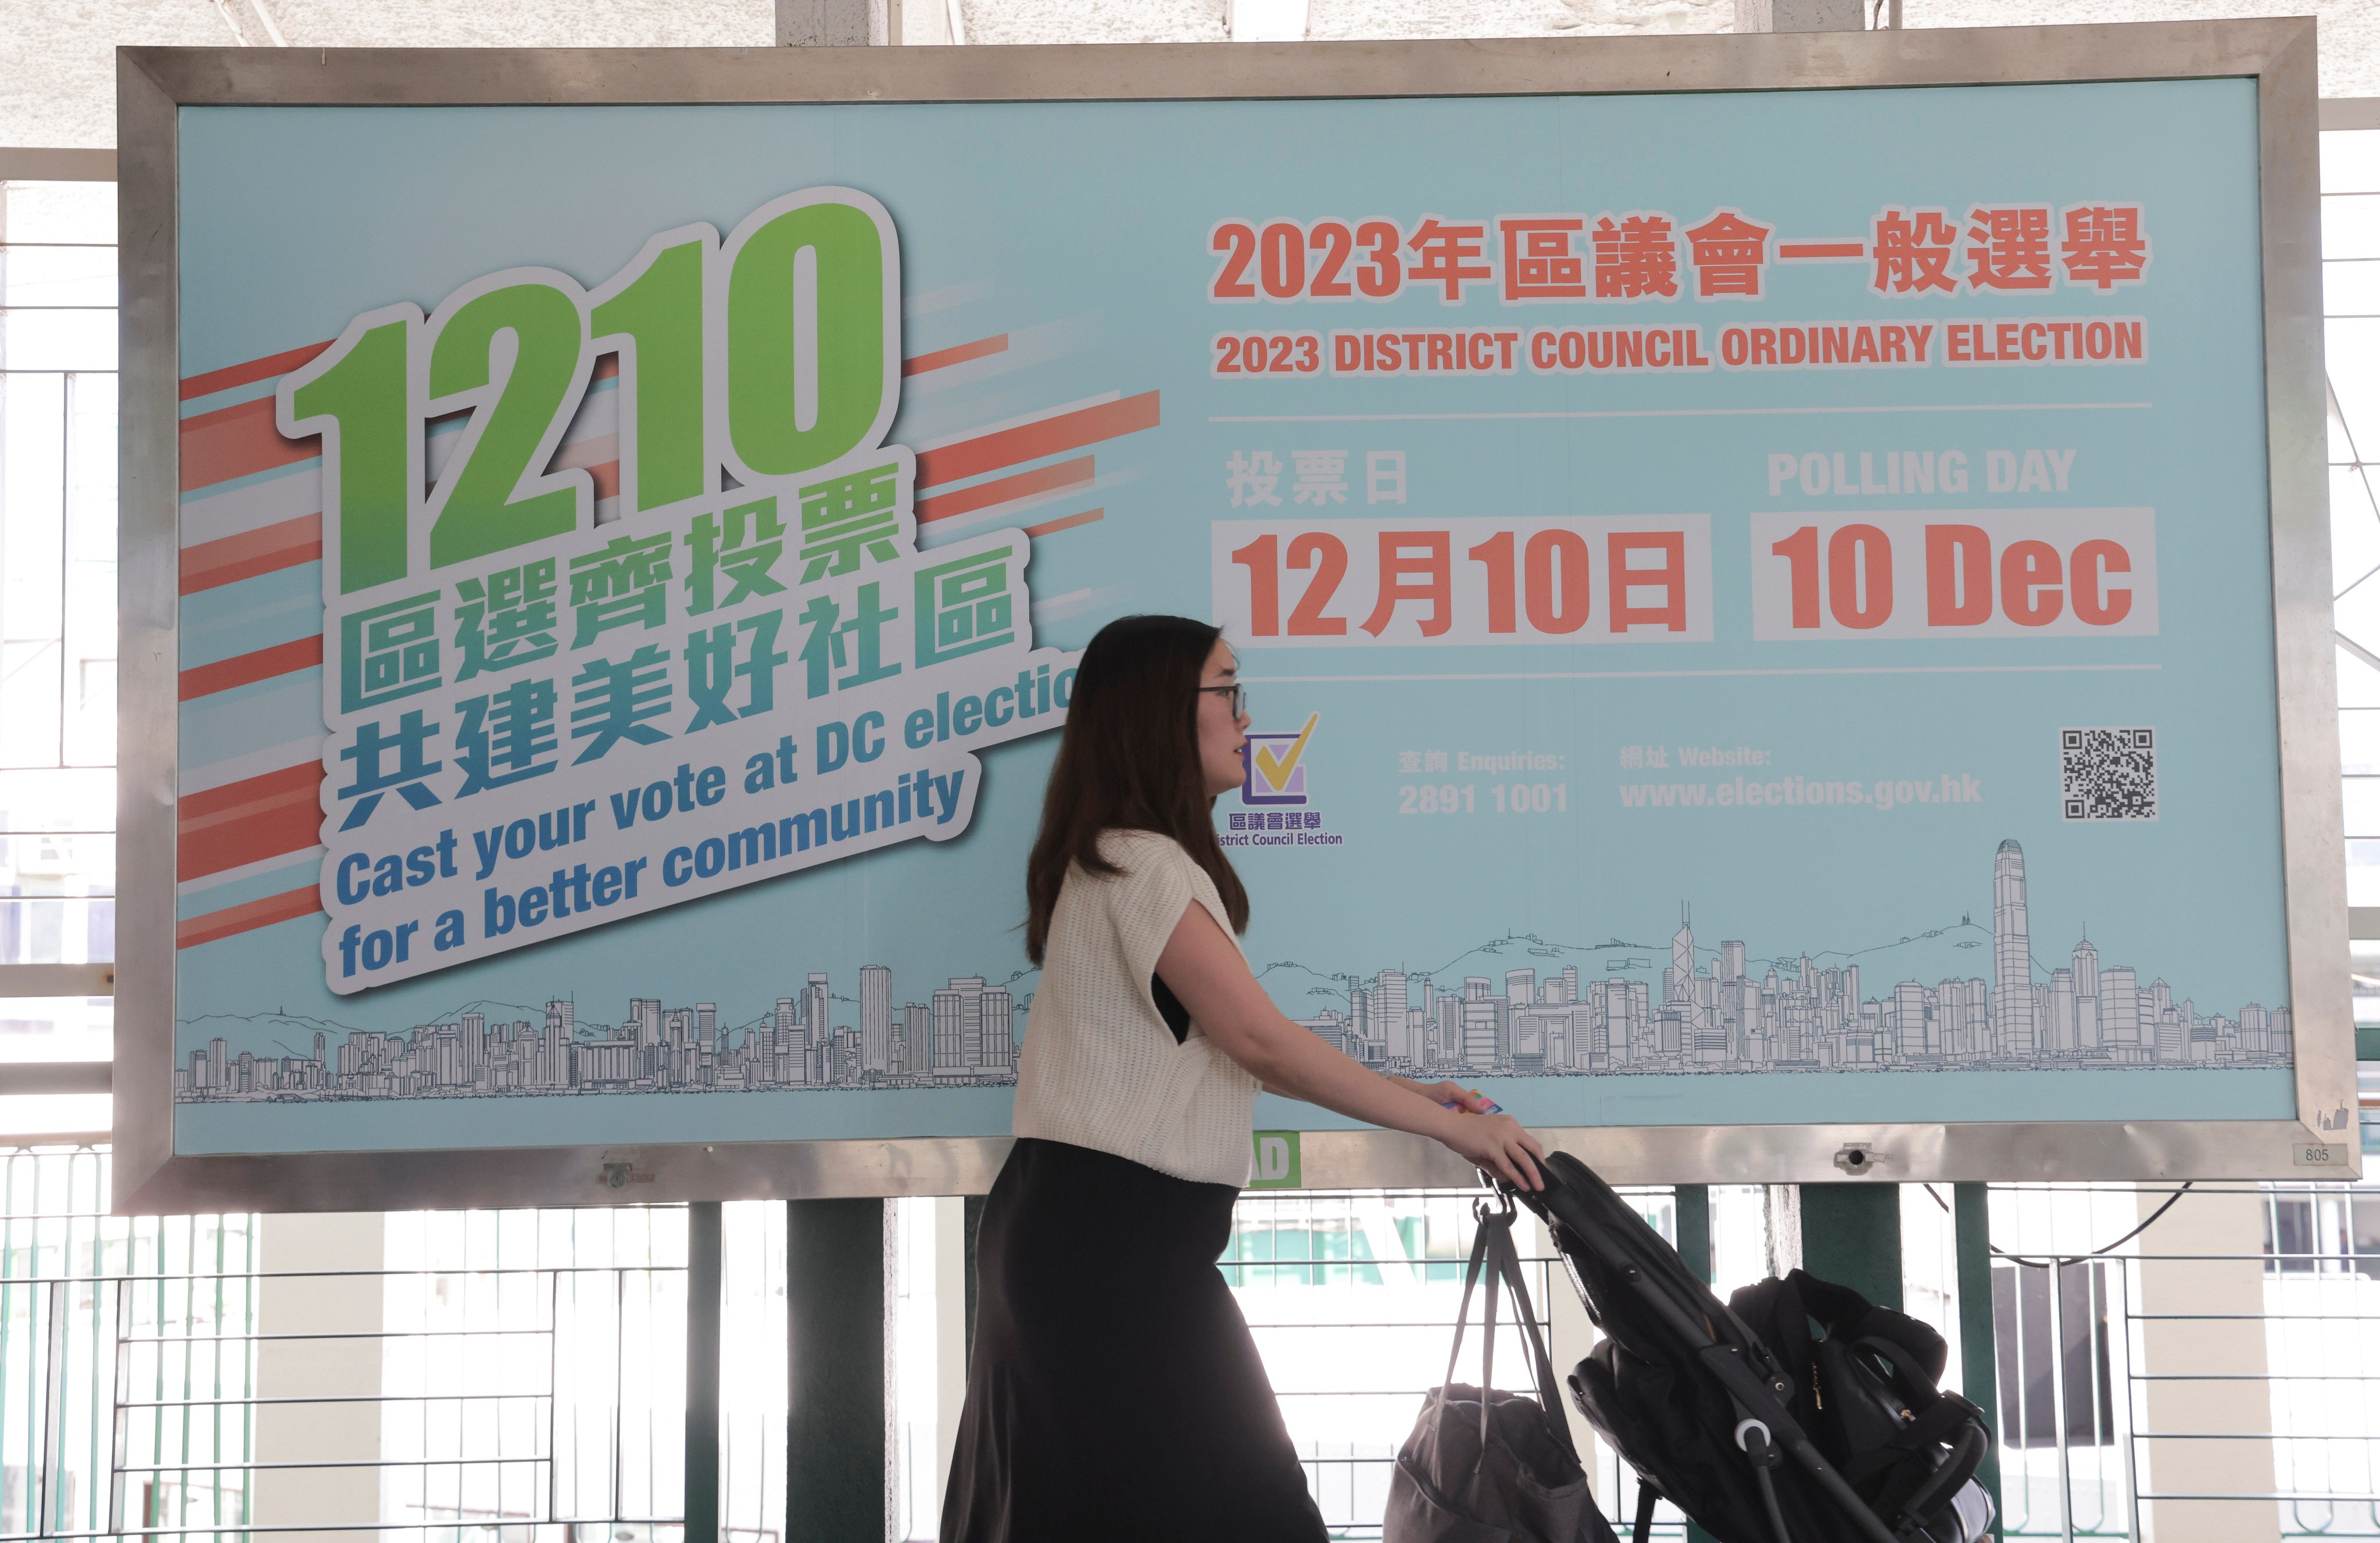 A pedestrian passes a large promotional poster for the 2023 district council elections, at Tsim Sha Tsui Pier on November 1. Centrists and the opposition have been all but frozen out of the upcoming election, leading to fears of reduced political diversity and representation. Photo: Jelly Tse